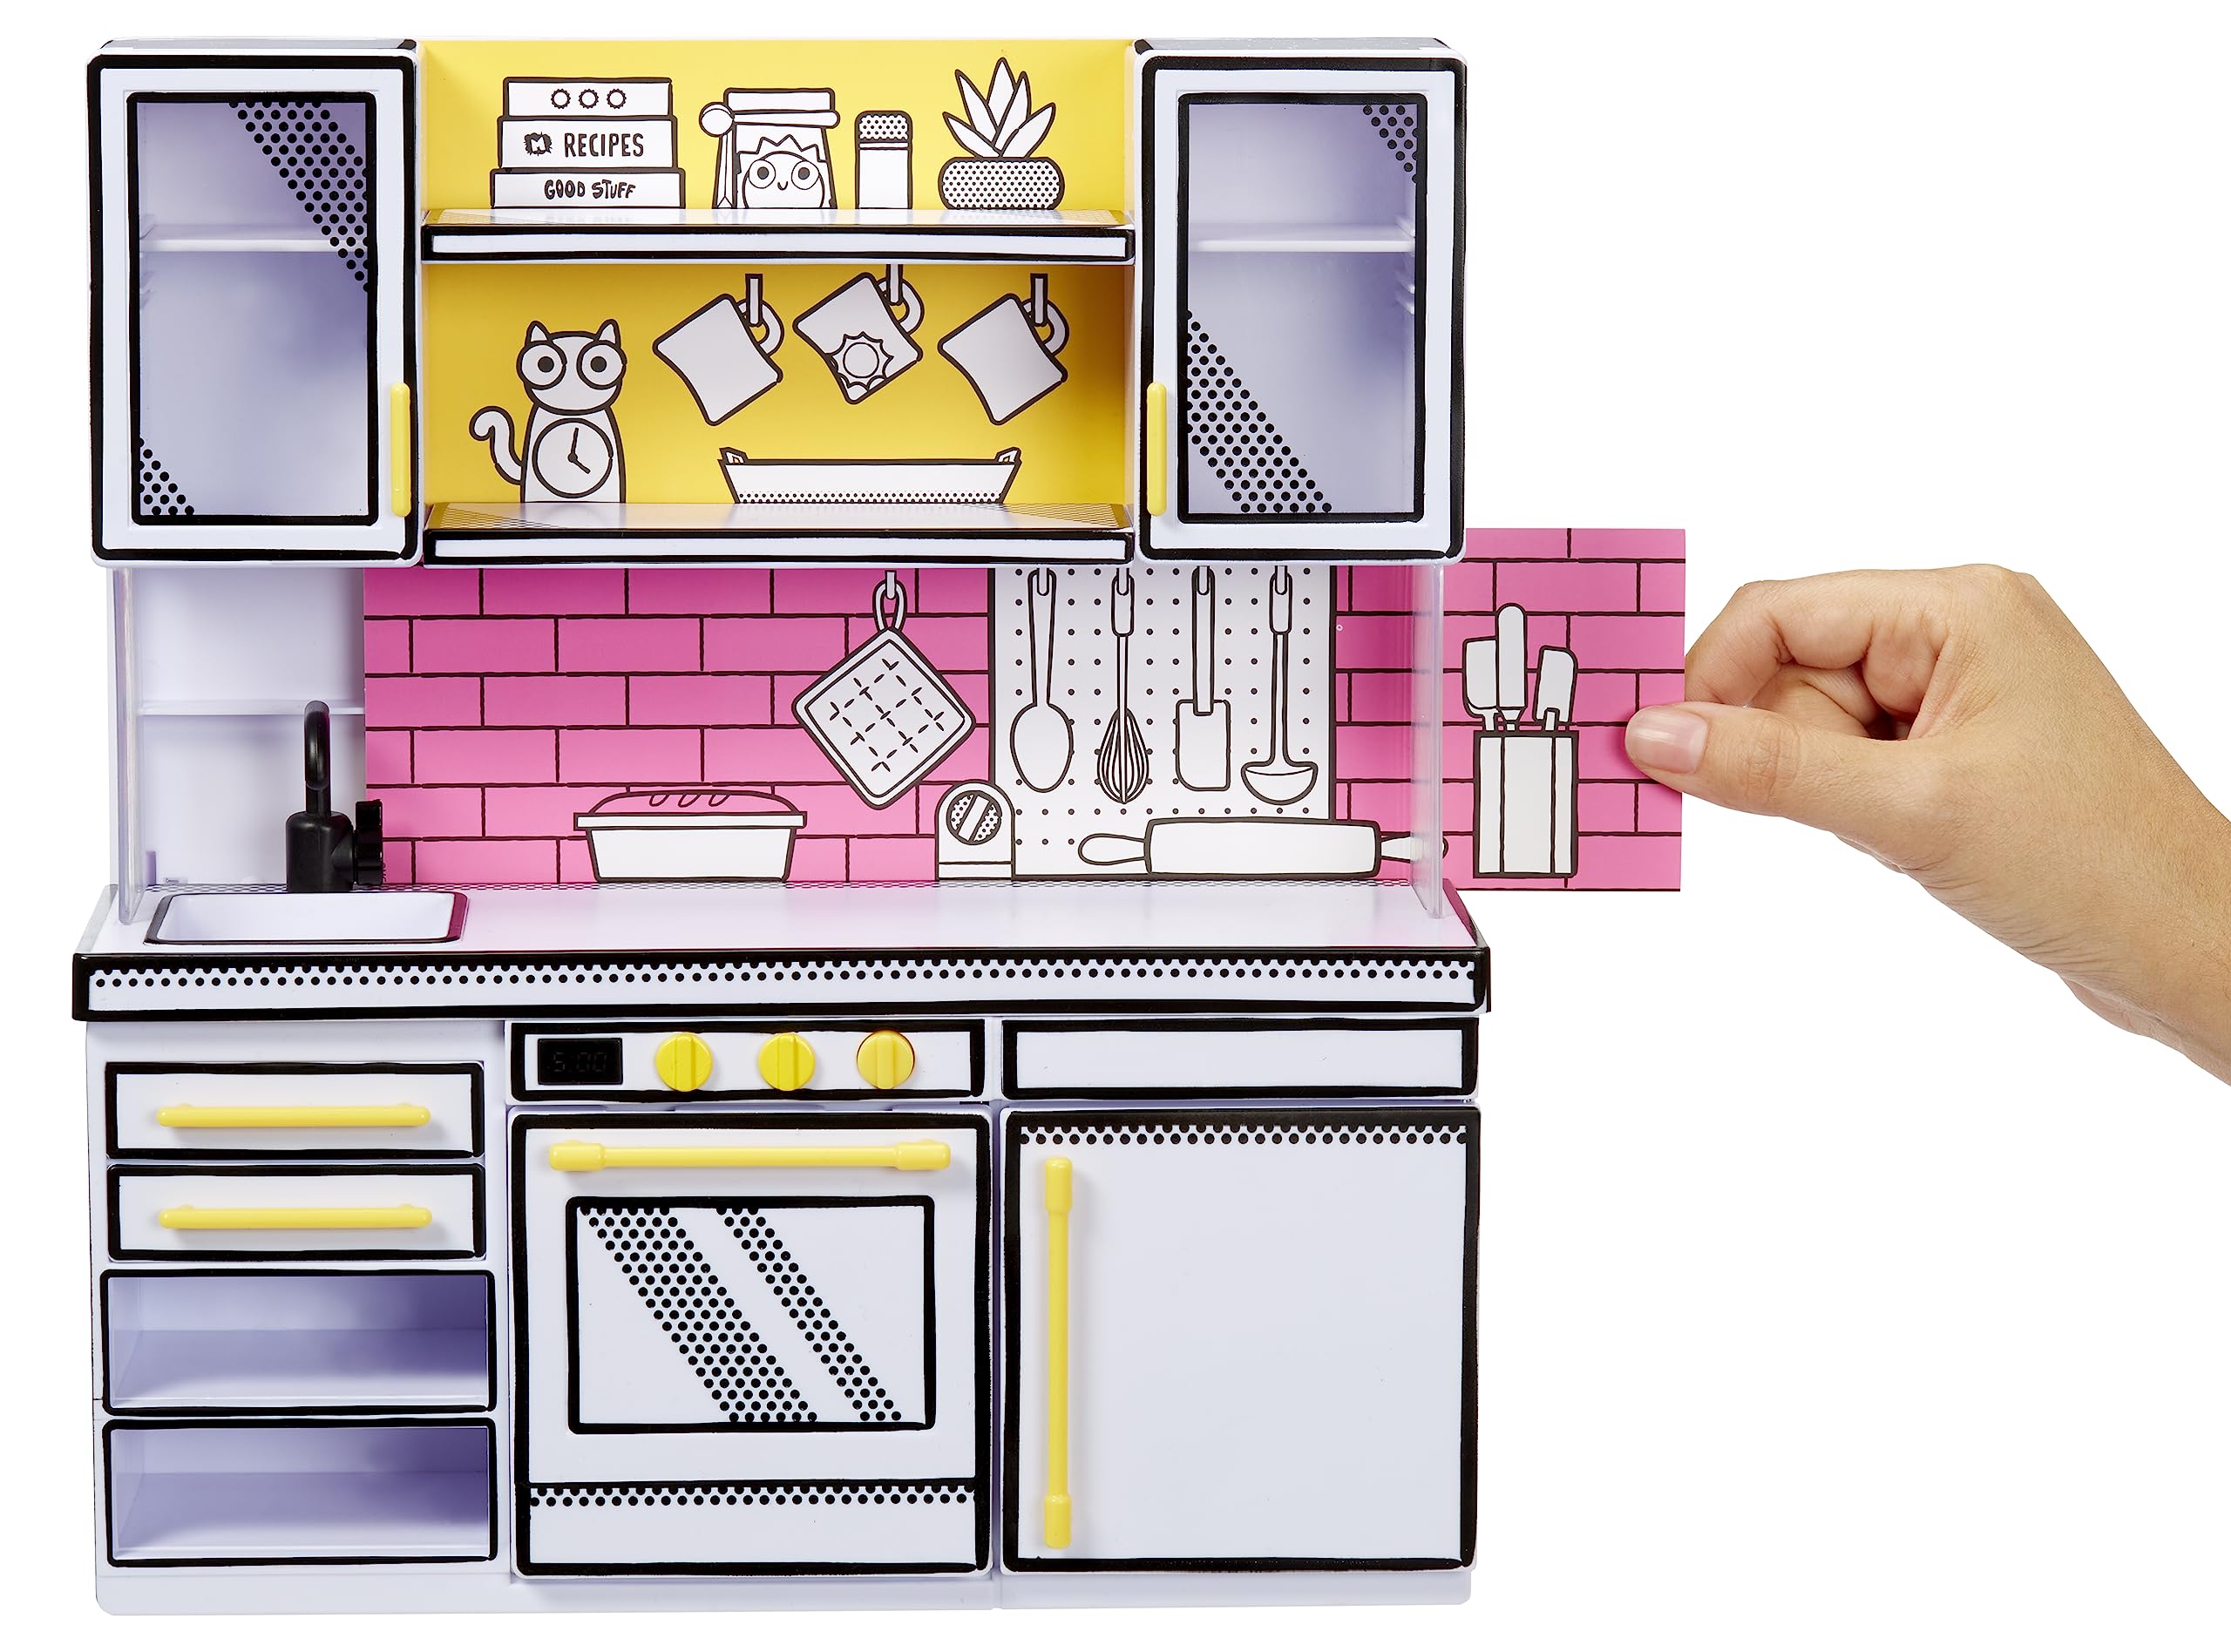 Make It Mini Kitchen MGA's Miniverse, Kitchen Playset, w/ UV Light, Collectibles, DIY, Resin Play, Exclusive, Mystery Recipe, Mini Oven Mitts, NOT EDIBLE, 8+